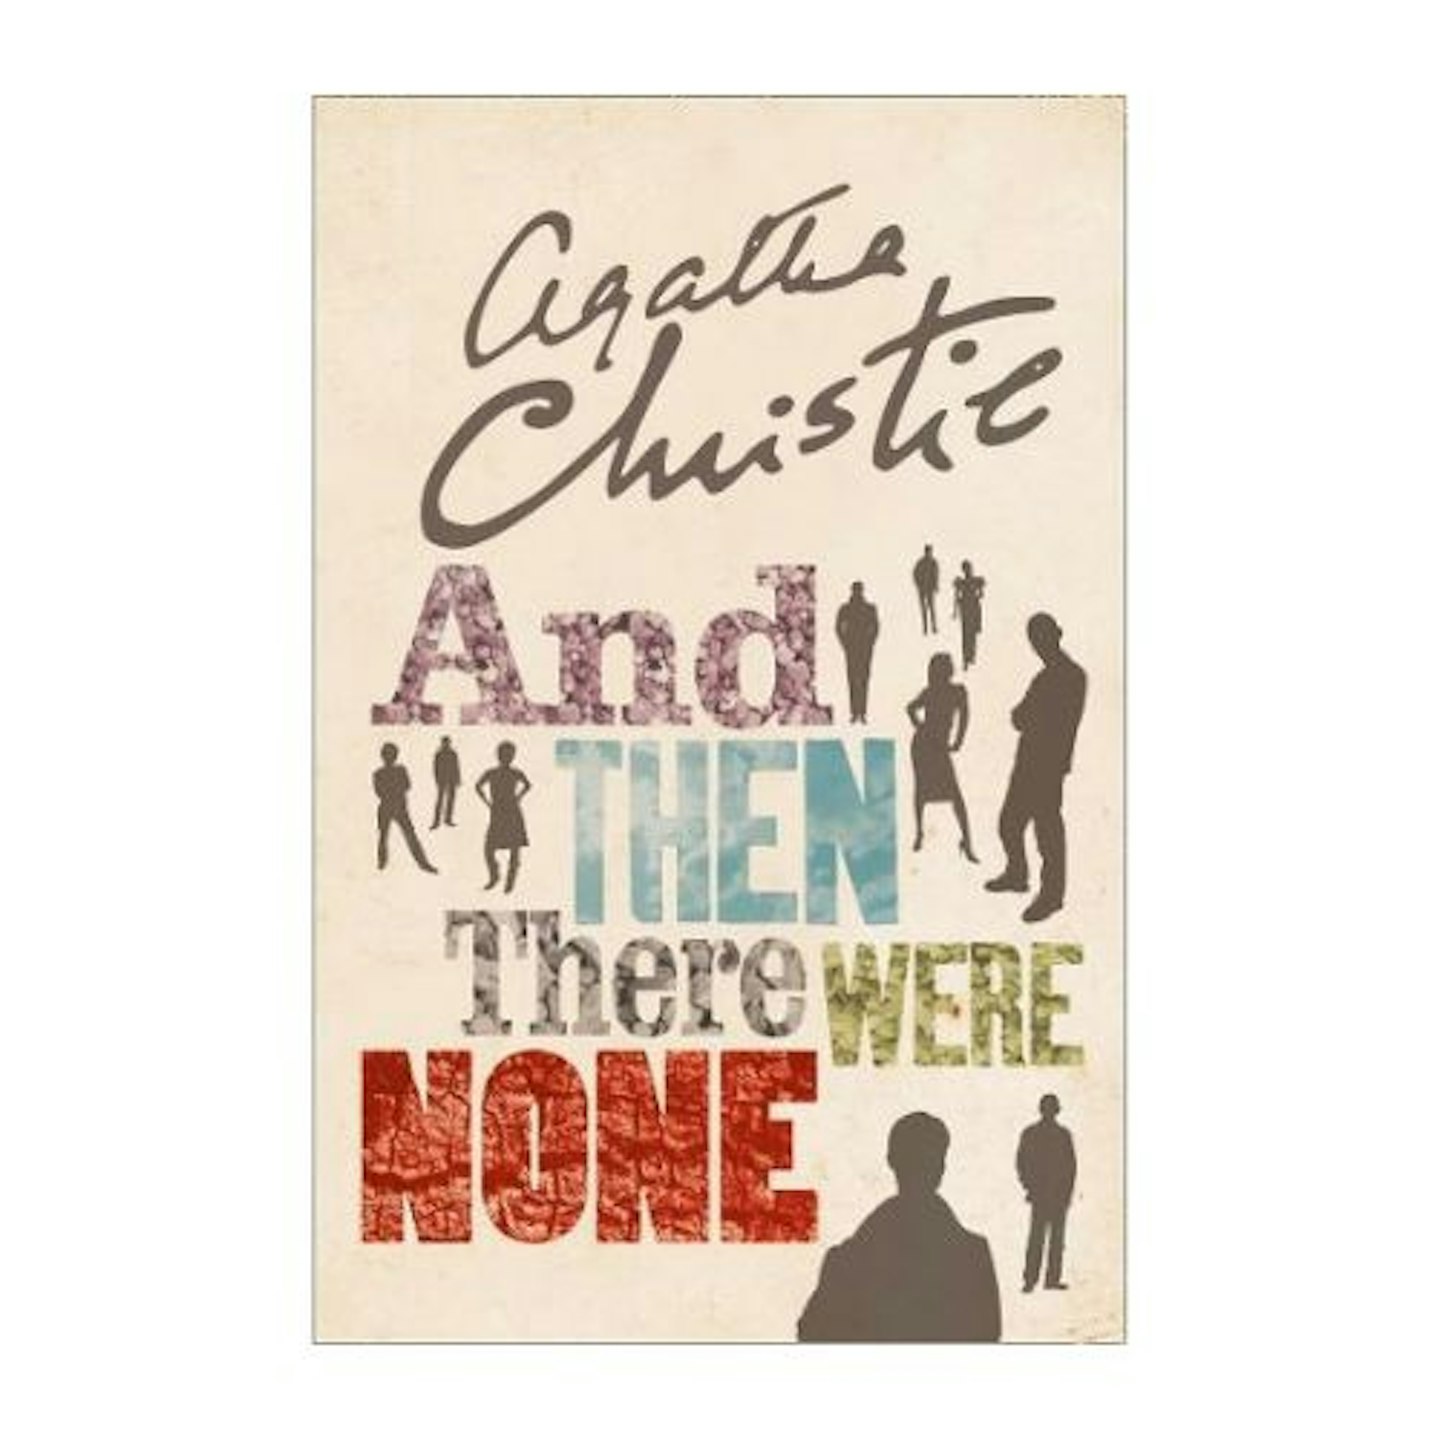 And Then There Were None: The World's Favourite Agatha Christie Book